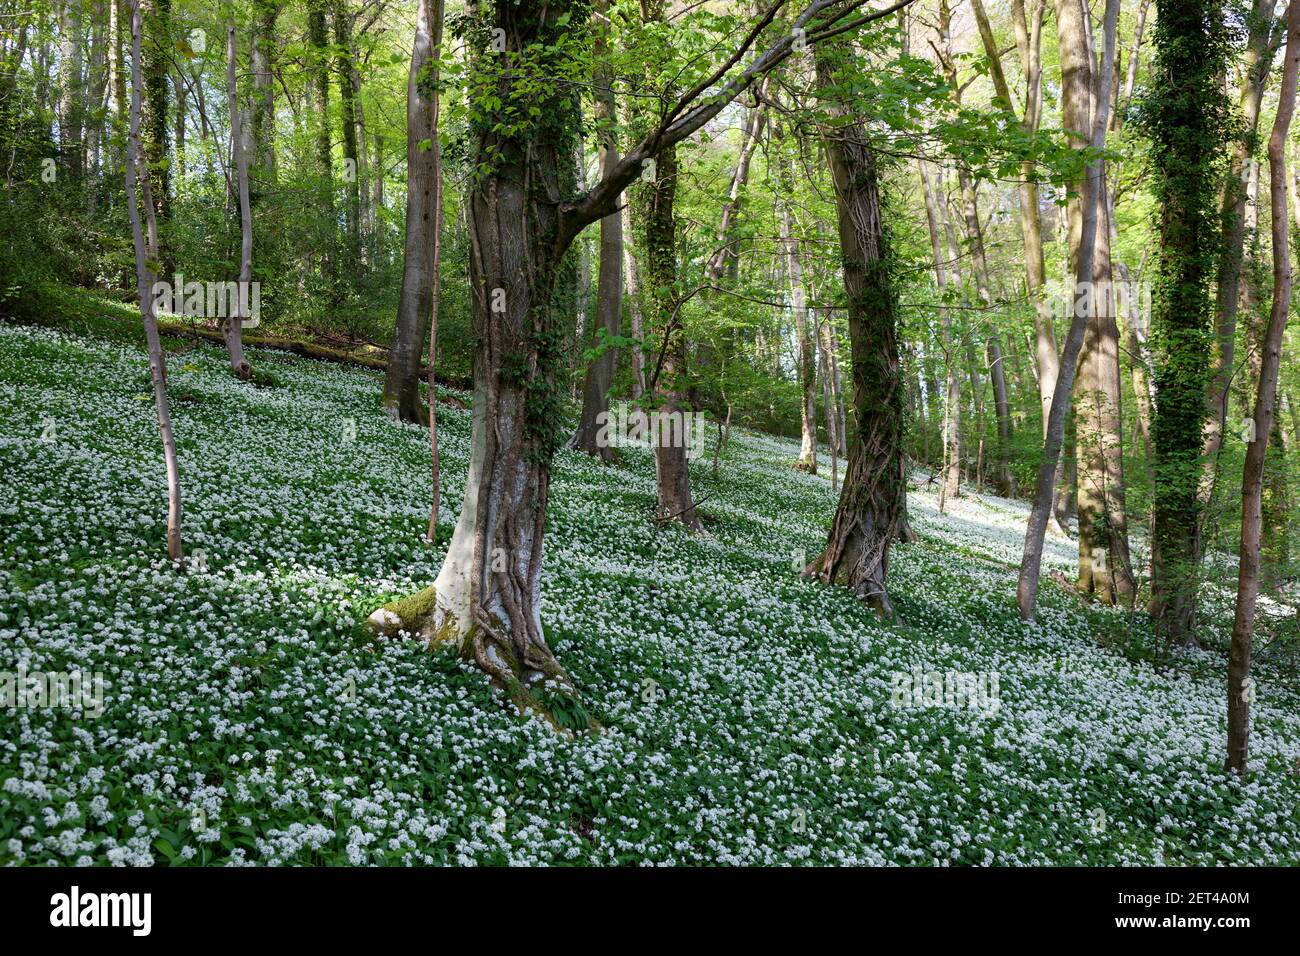 Swathes of wild garlic and bluebells in banked woodland of the Cotswolds near Stroud, Gloucestershire, UK Stock Photo